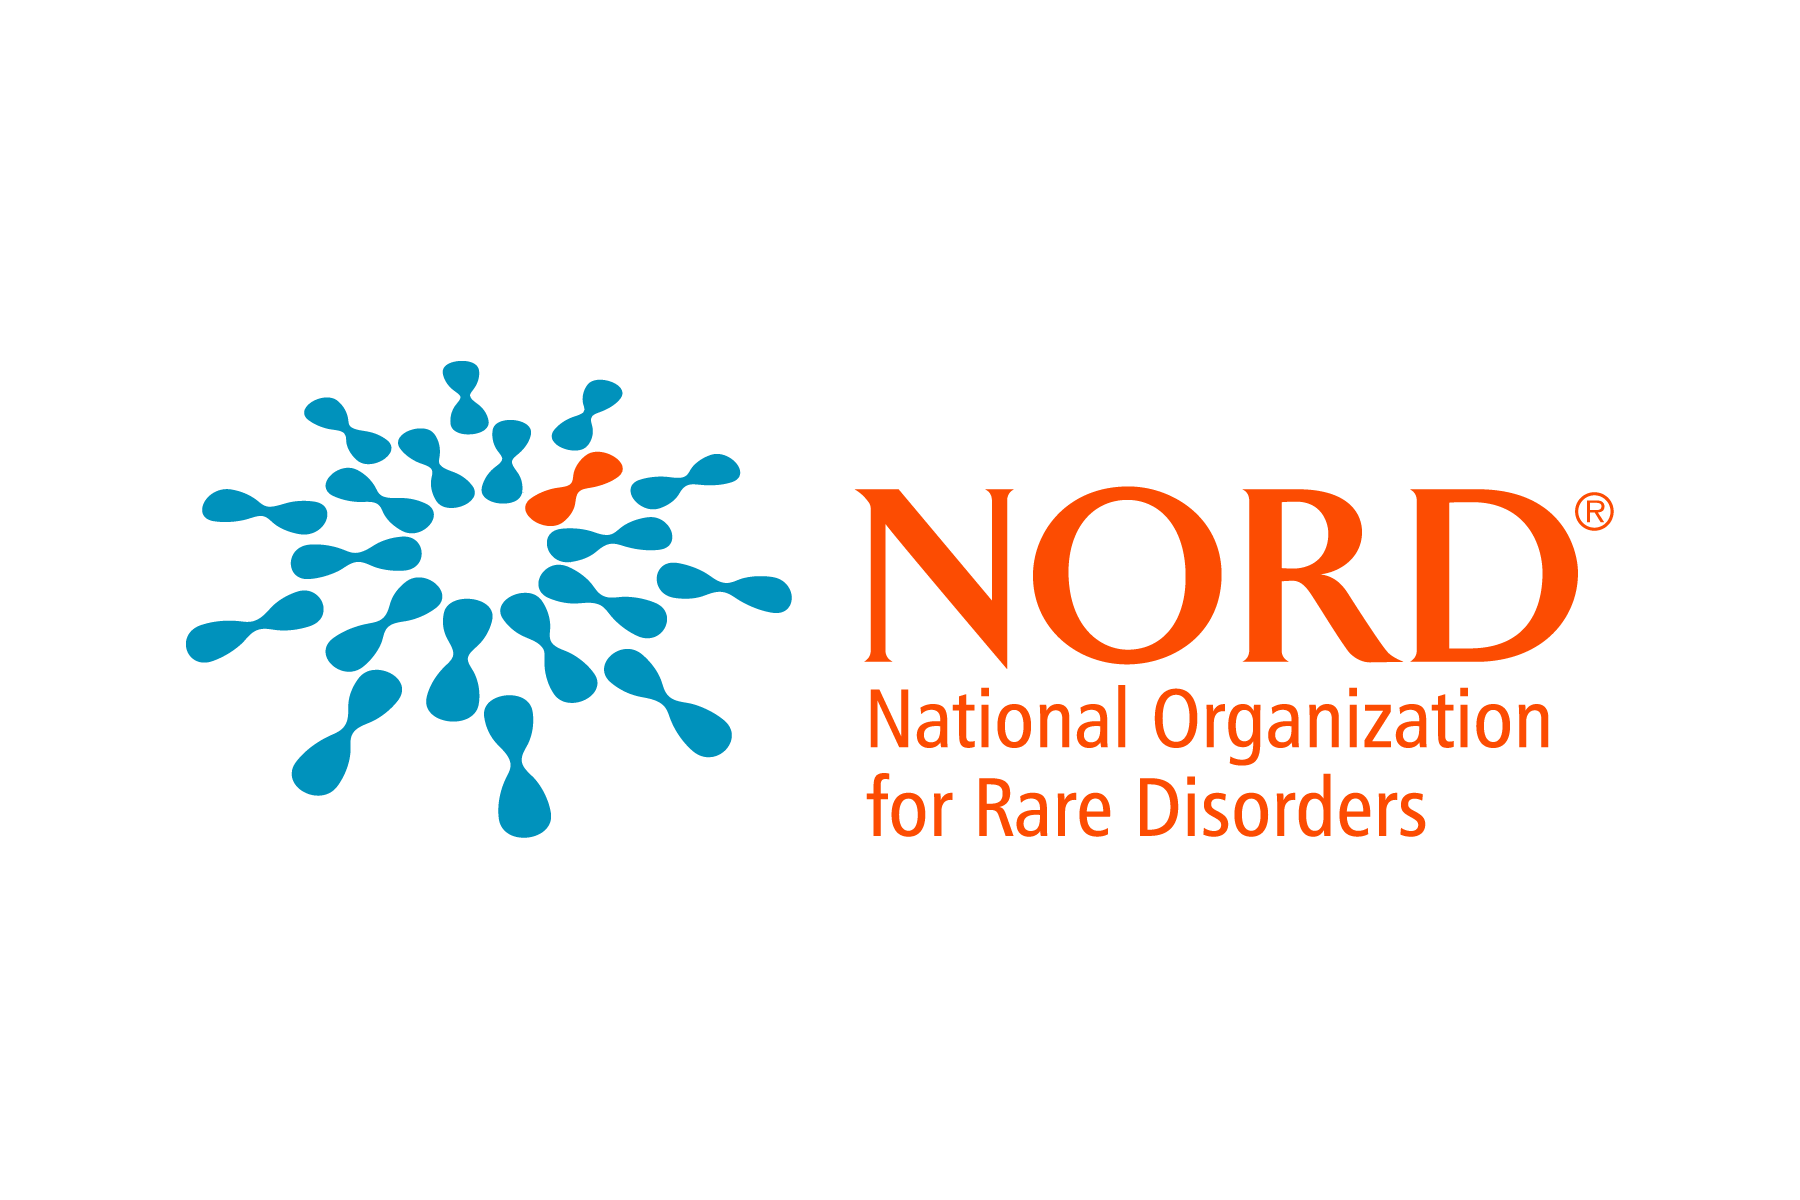 Copay Logo - NORD opposes implementation of copay accumulator programs in health ...